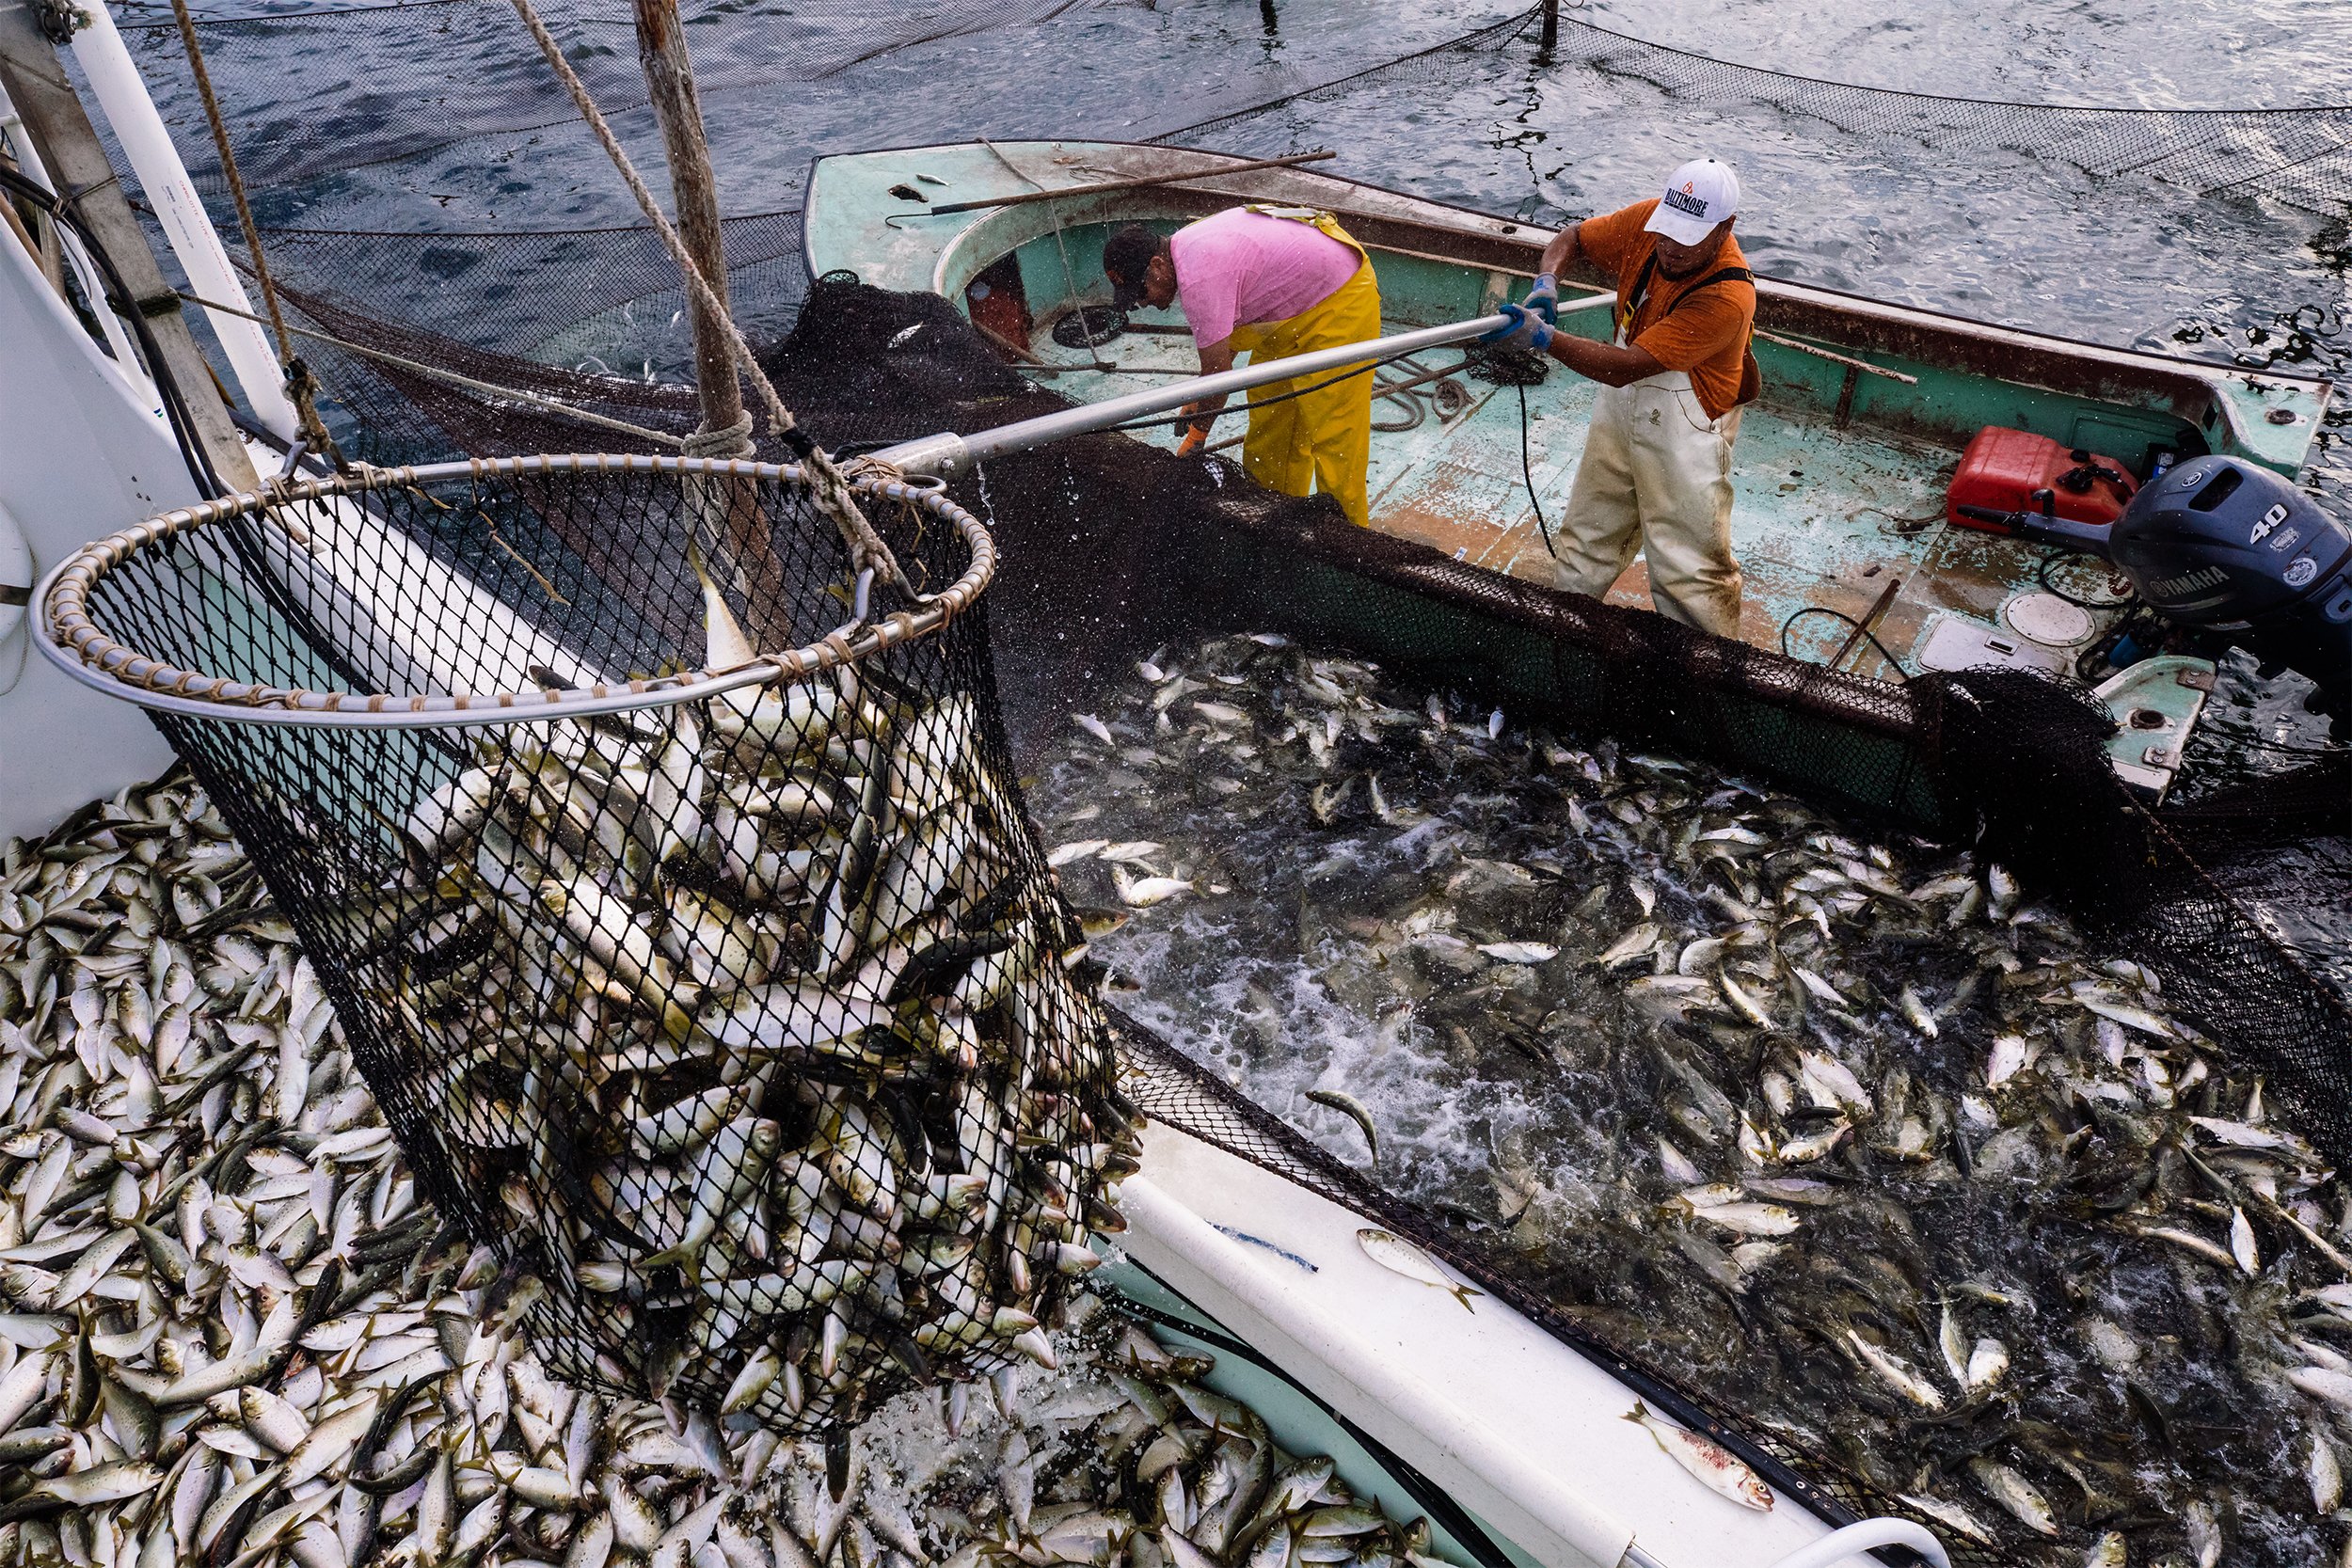  Hector Rene Modueño, left, and Edgar Riber transfer menhaden from a pound net into Captain Boo Polly’s boat near the shore of St. Mary’s County. The process of transferring fish onto the boat is physically intensive, leaving the crew wading waist-de